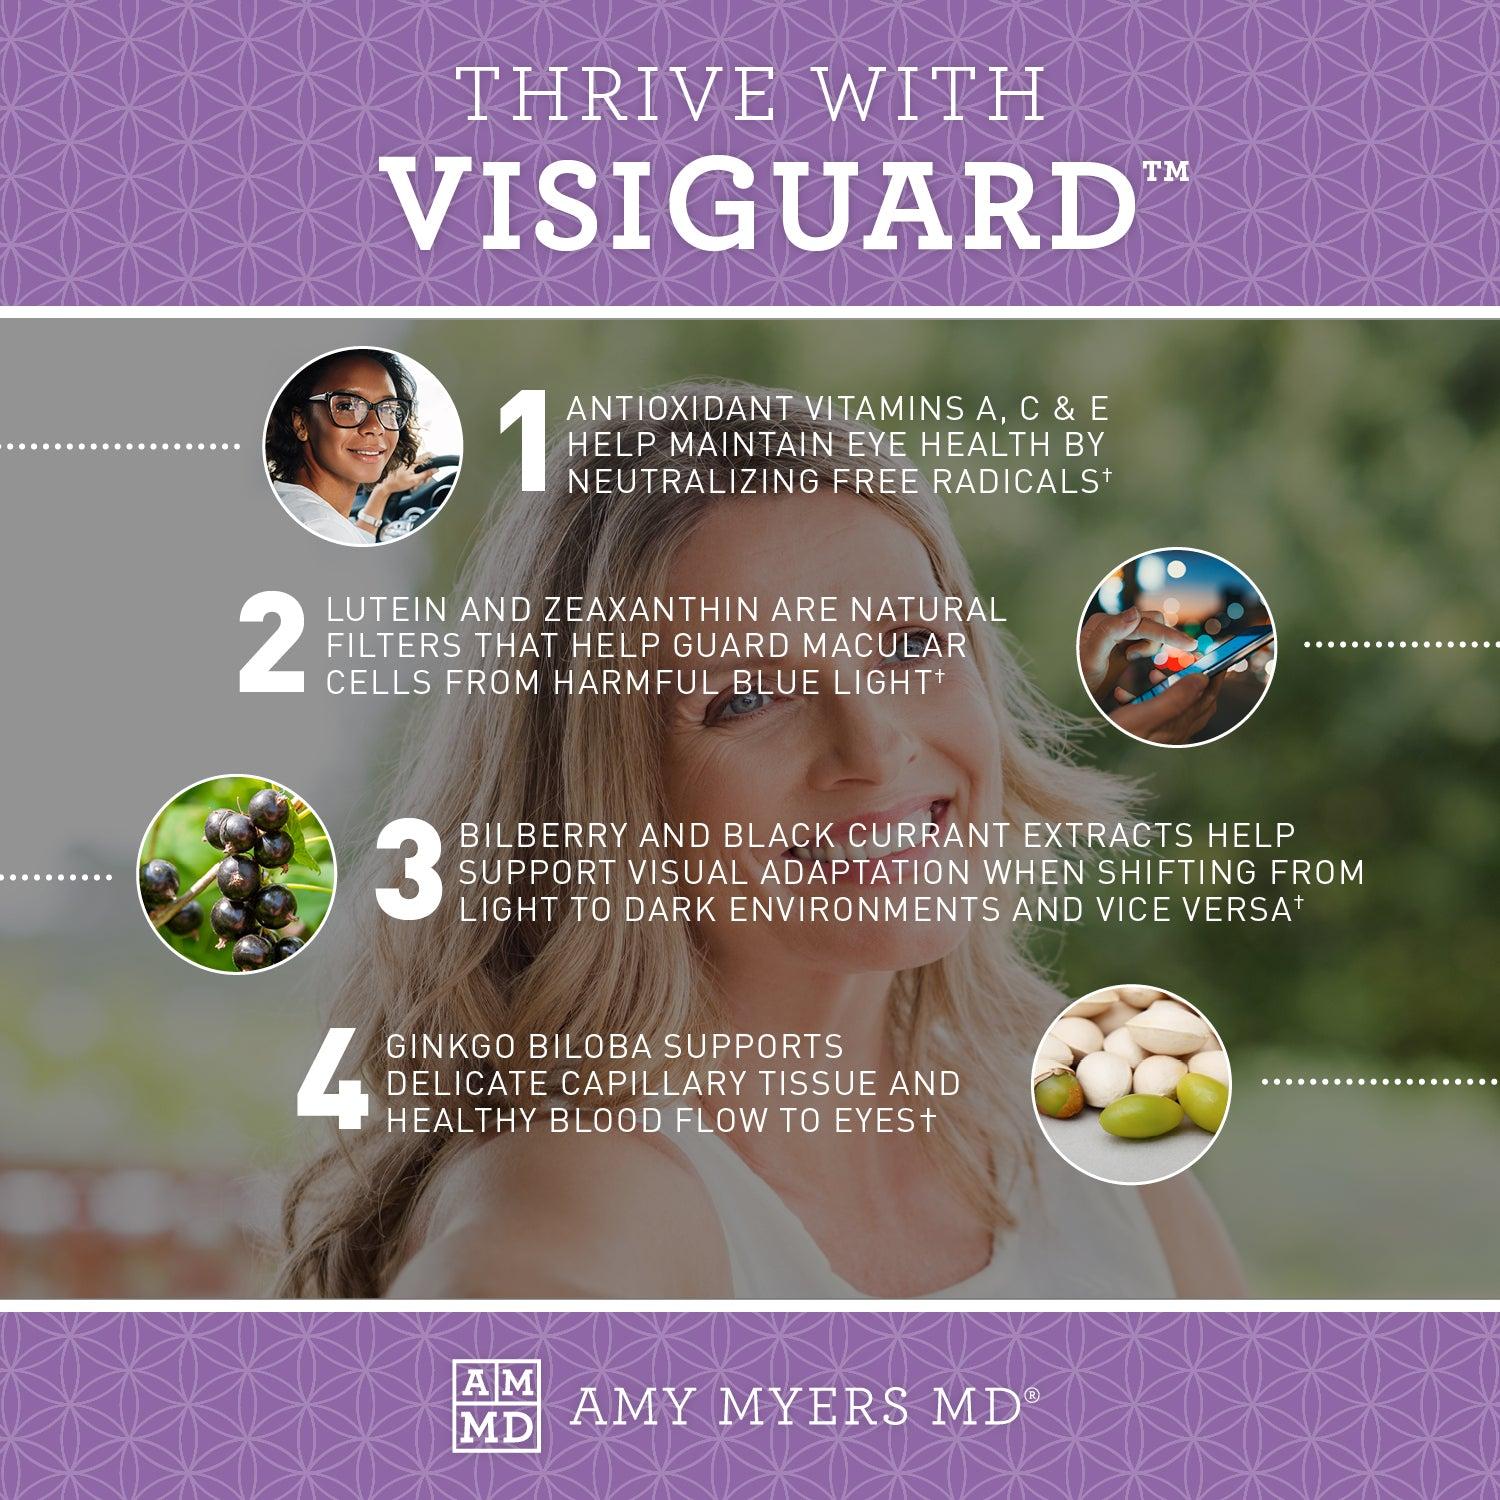 Thrive With Visiguard™ - Antioxidant vitamins - Lutein and Zeaxanthin - Bilberry and Black Currant - Ginkgo Bilboa - Infographic - Amy Myers MD®